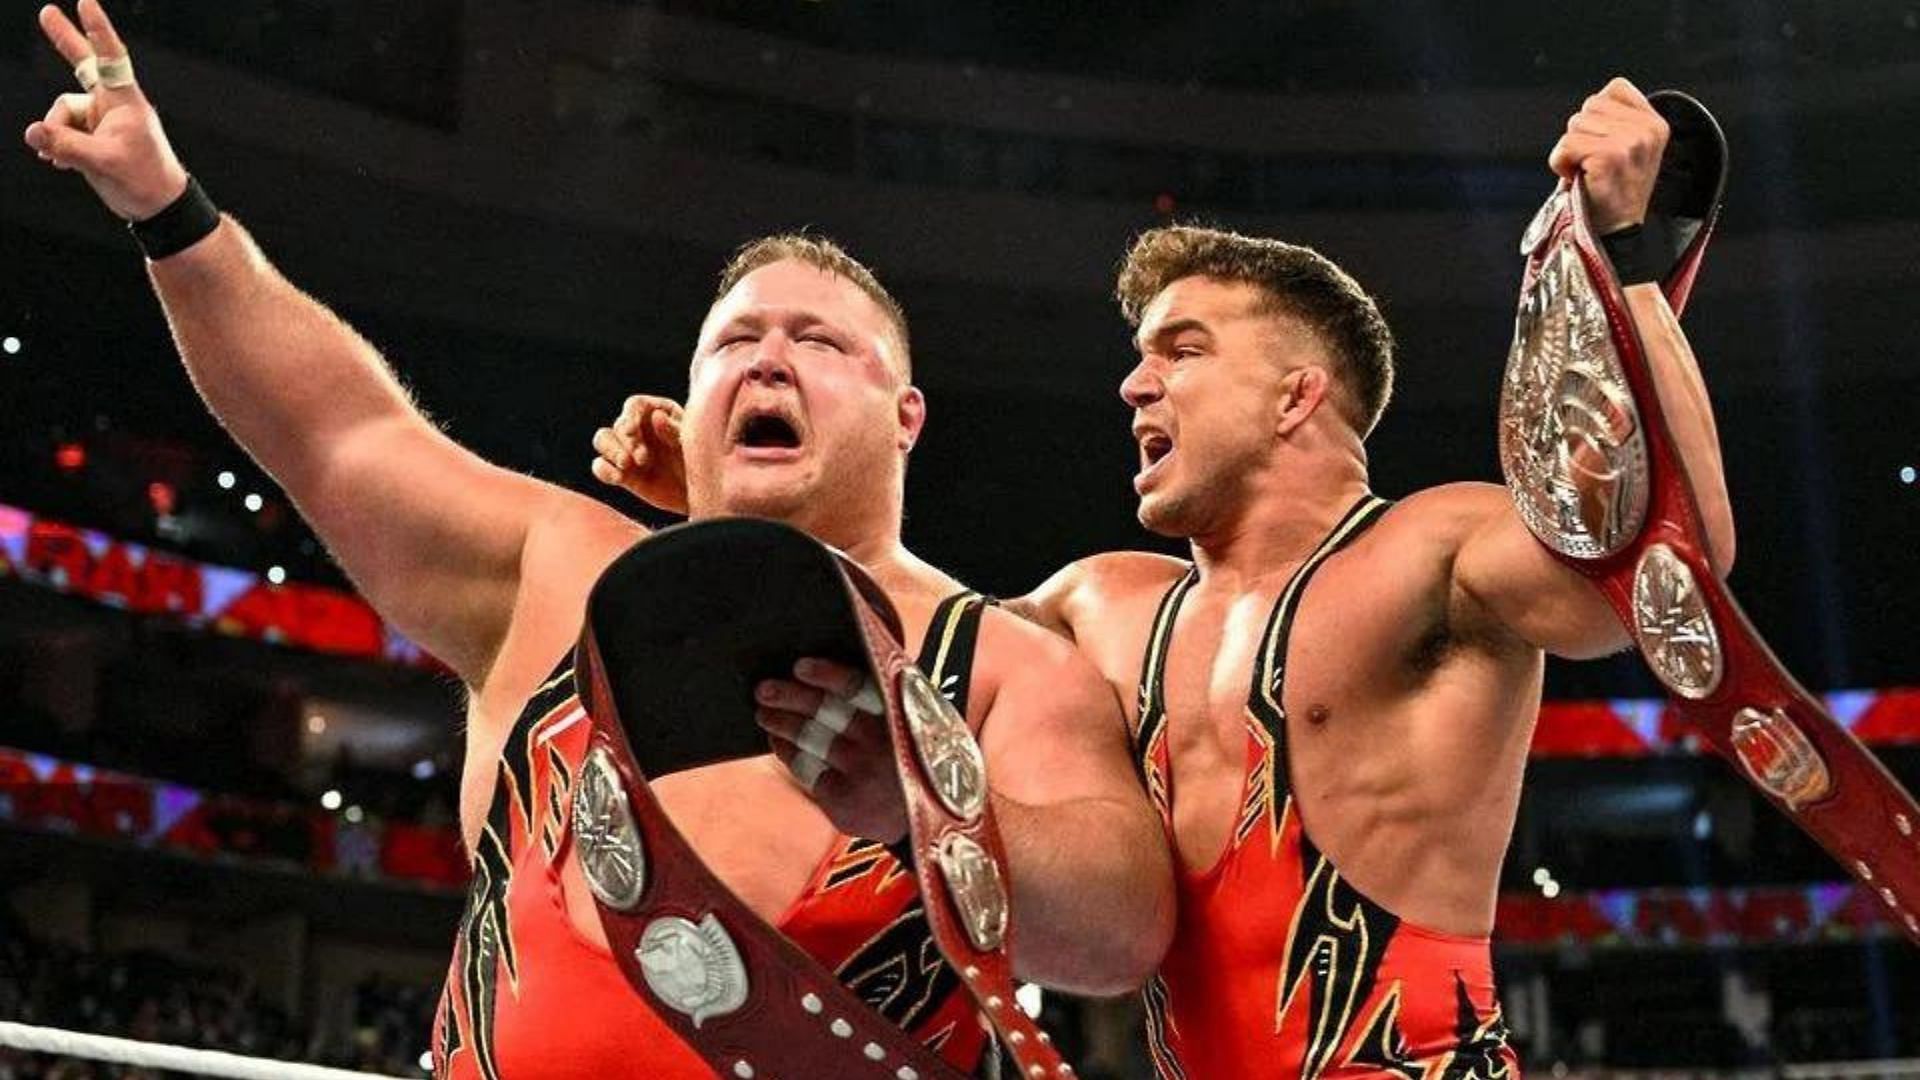 Otis and Chad Gable are former RAW Tag Team Champions